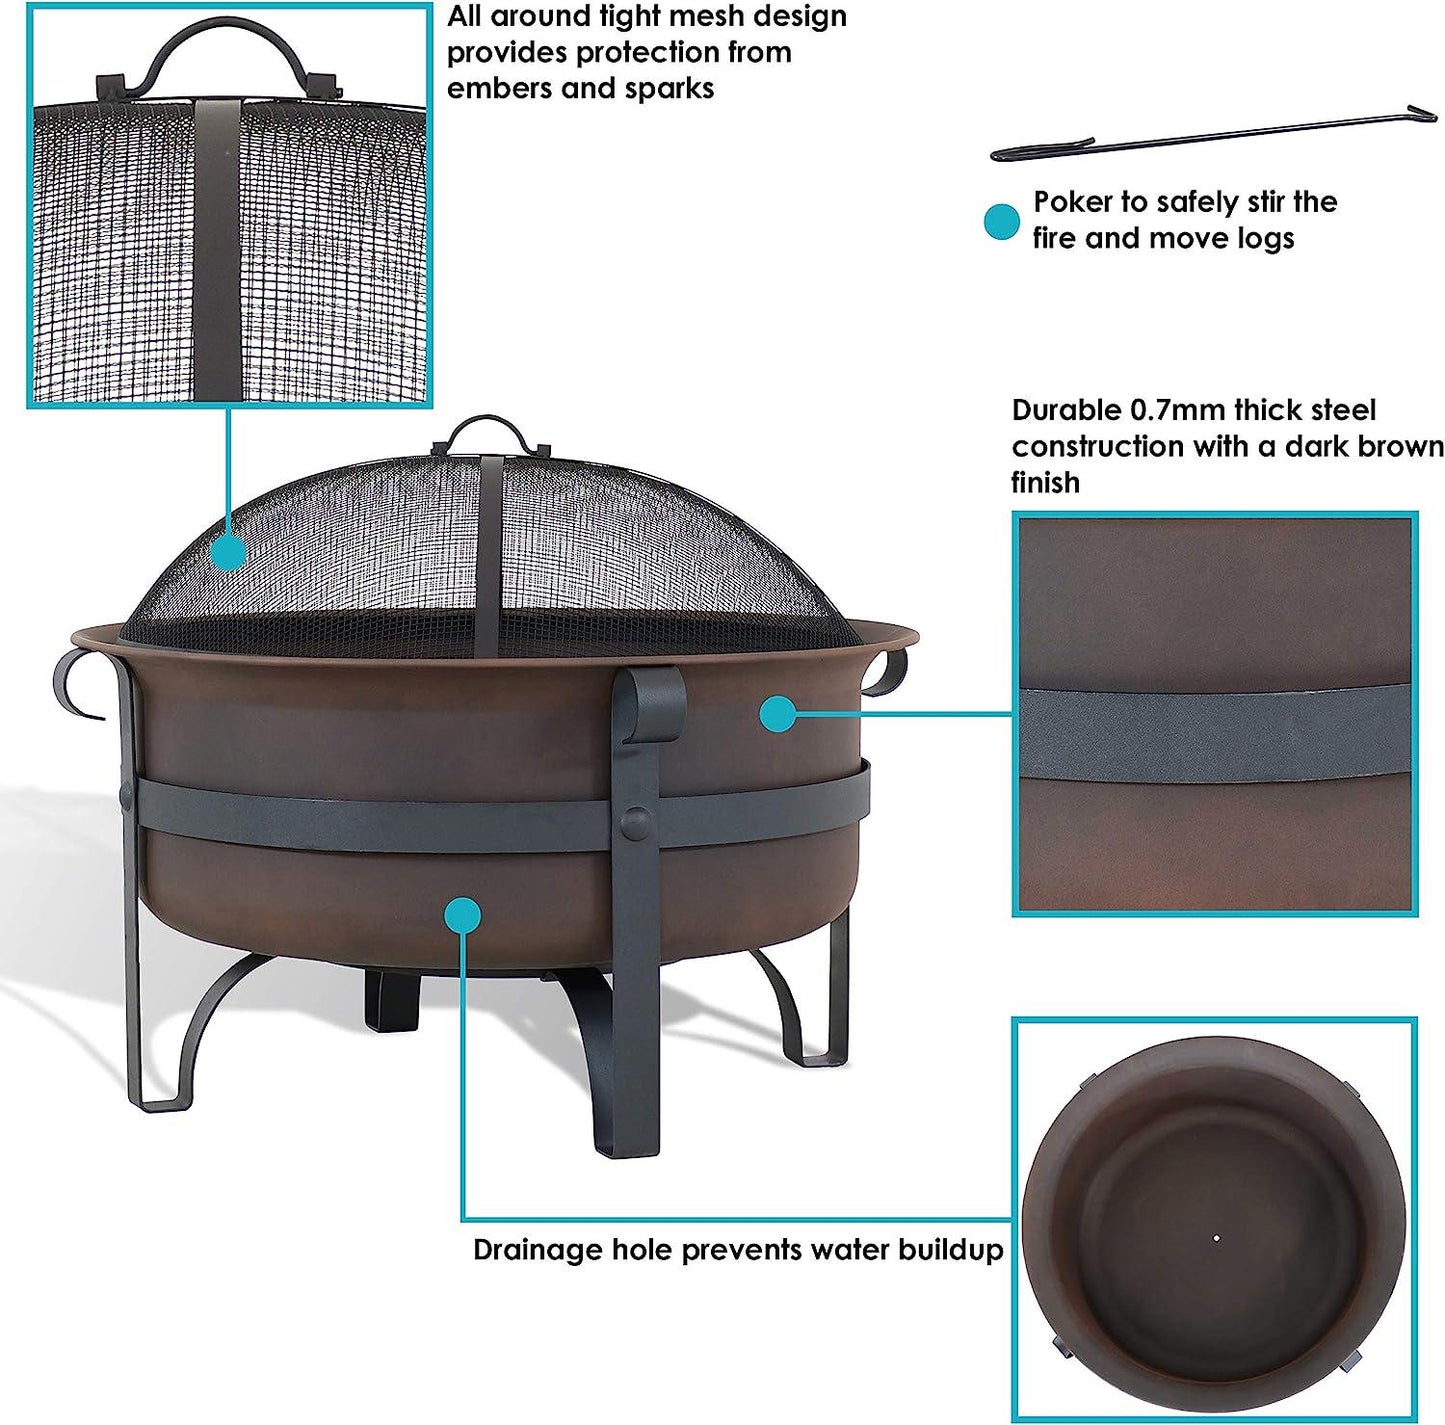 Sunnydaze 29-Inch Bronze Cauldron Wood-Burning Fire Pit Bowl - Includes Portable Poker and Spark Screen